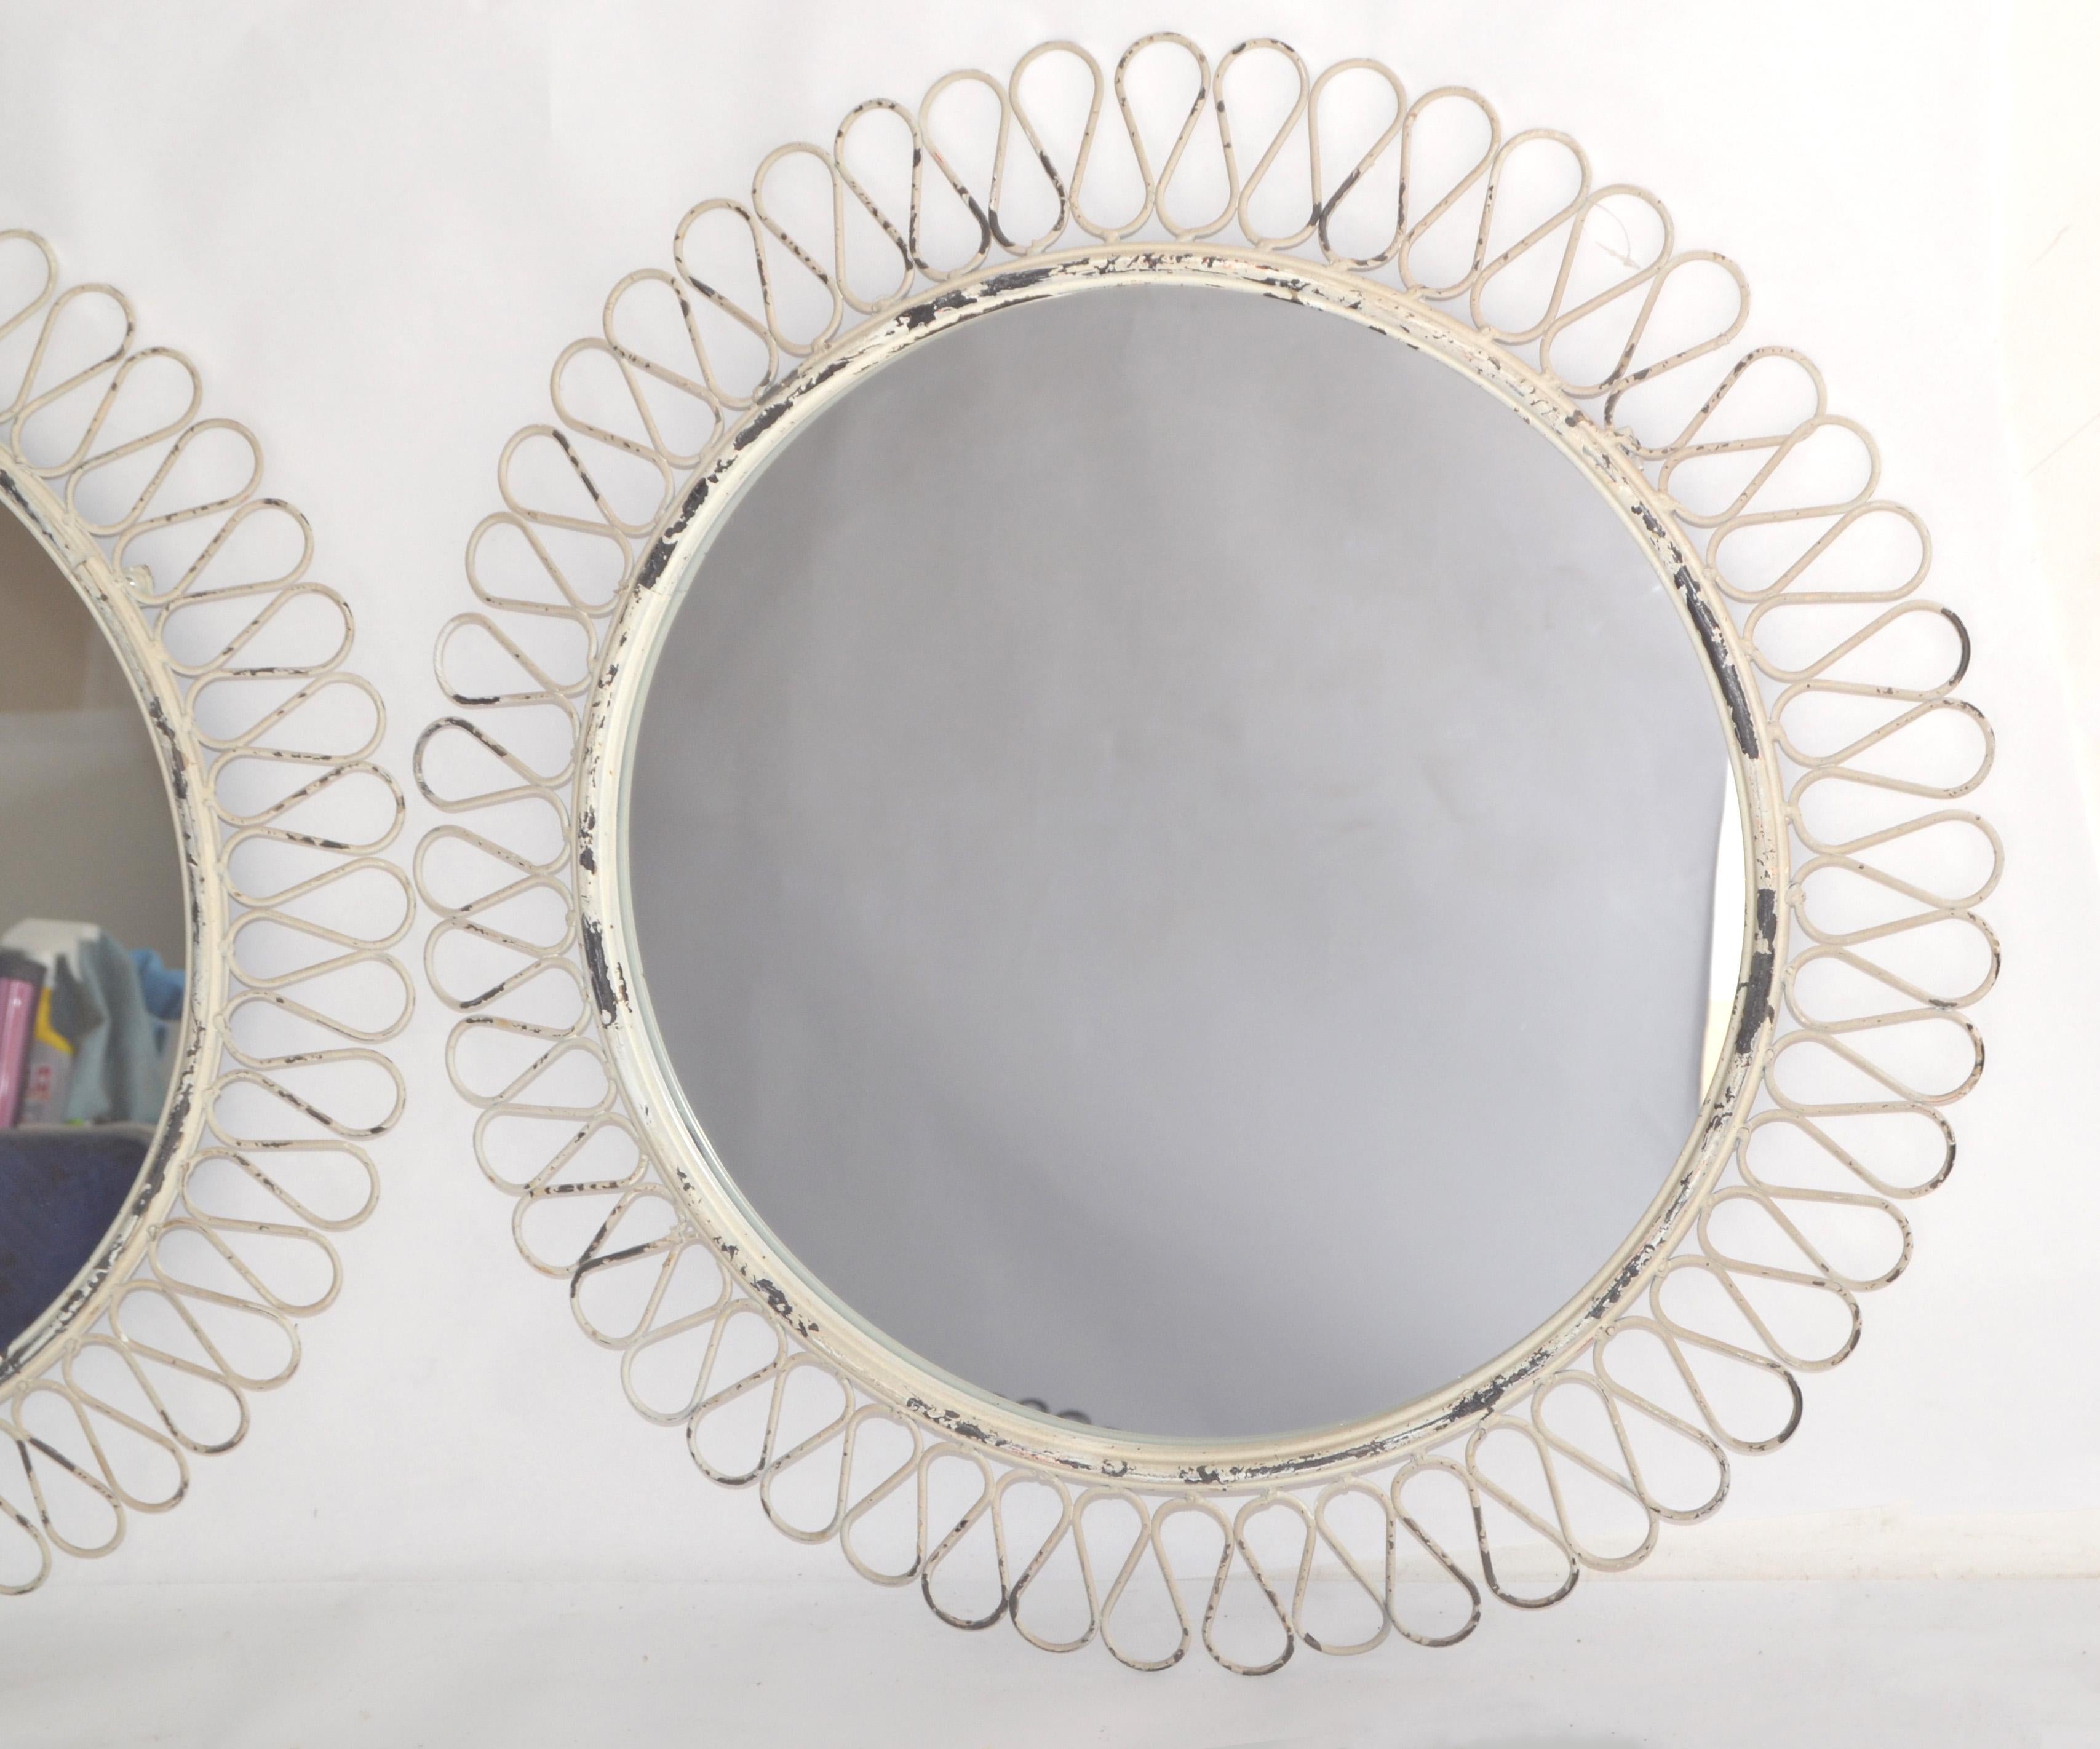 Hand-Crafted Pair, French Round Wrought Iron Wall Mirror Art Deco Style White Distressed Look For Sale